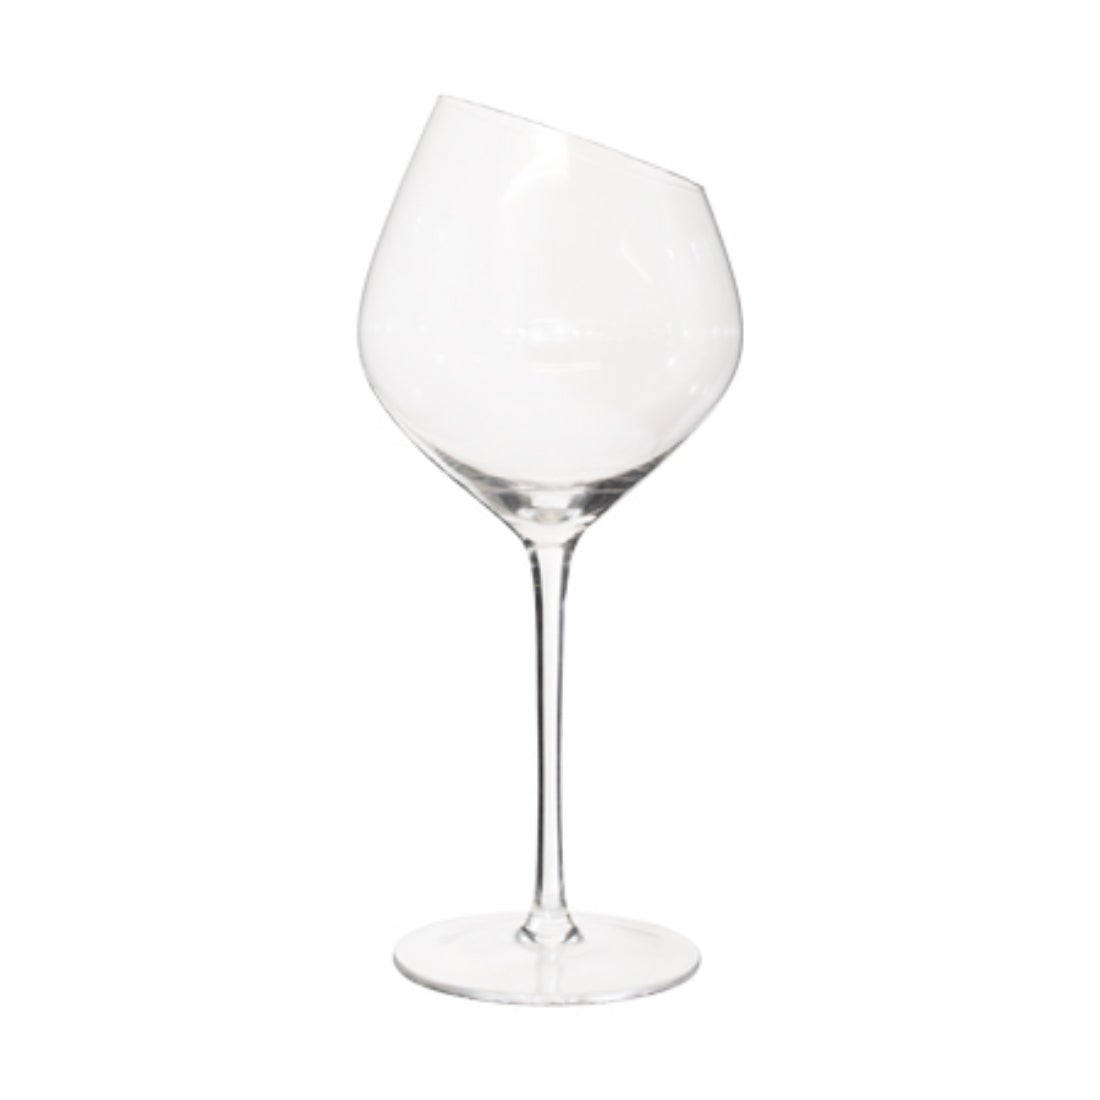 Slanted Wine Glass - Patrick (Available from 4 Feb 2021)